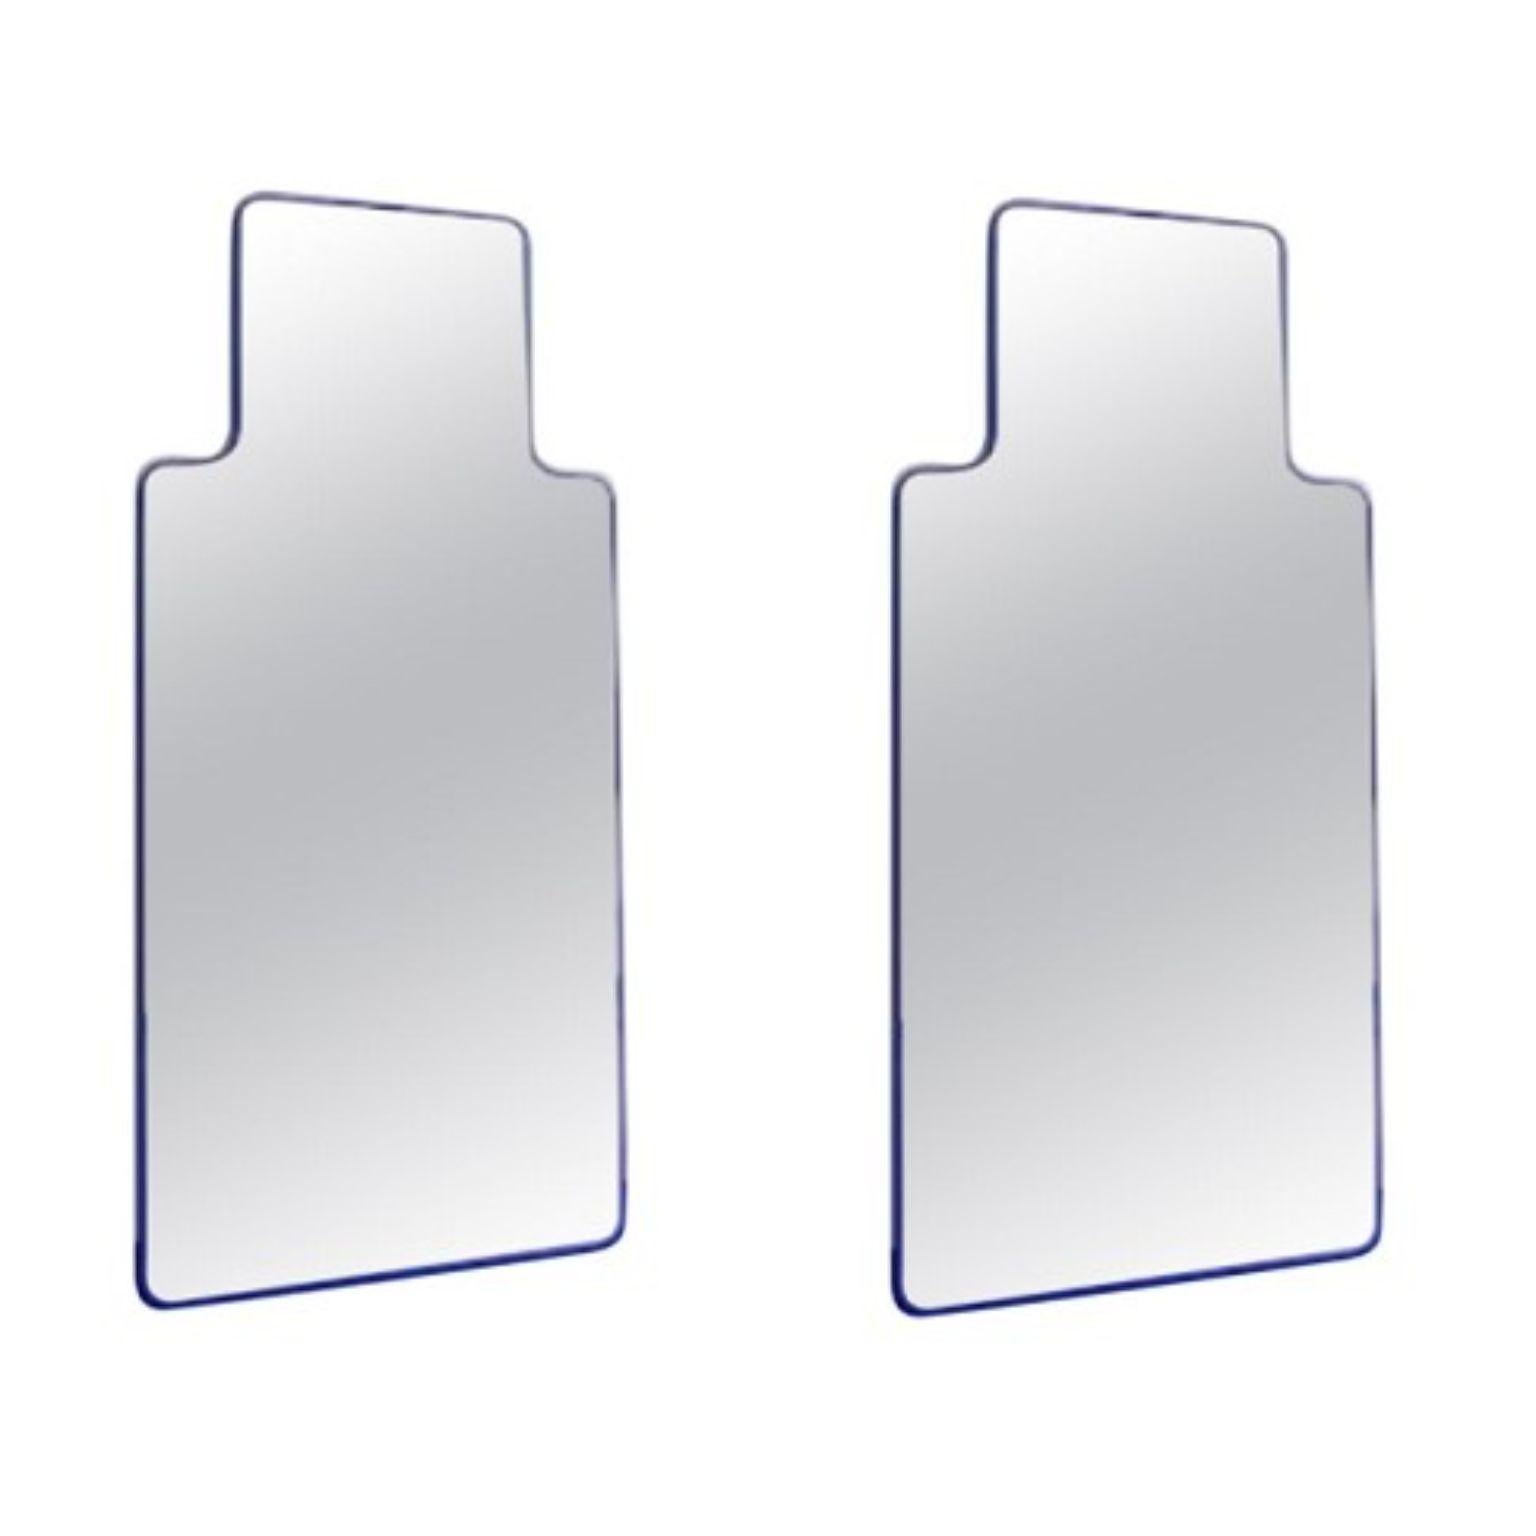 Set of 2 Loveself 02 mirrors by Oito
Dimensions: D70 x W4 x H180 cm
Materials: peinting mdf, silver glass mirror

Loveself is a collection of mirrors created by our team of designers oito design . The mission of our collection is to call